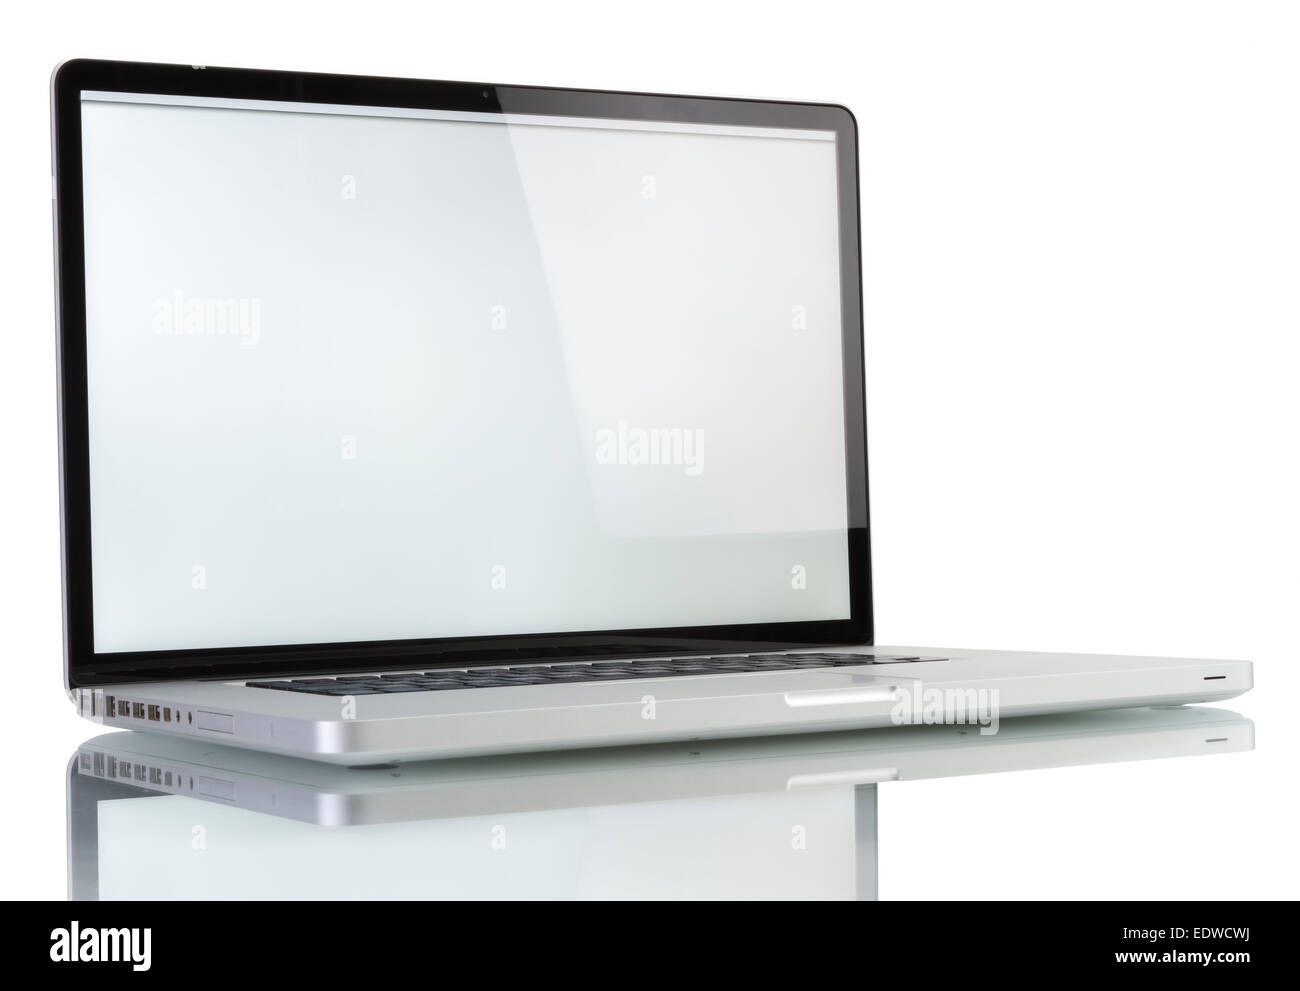 Laptop with blank white screen. Isolated on white background Stock Photo